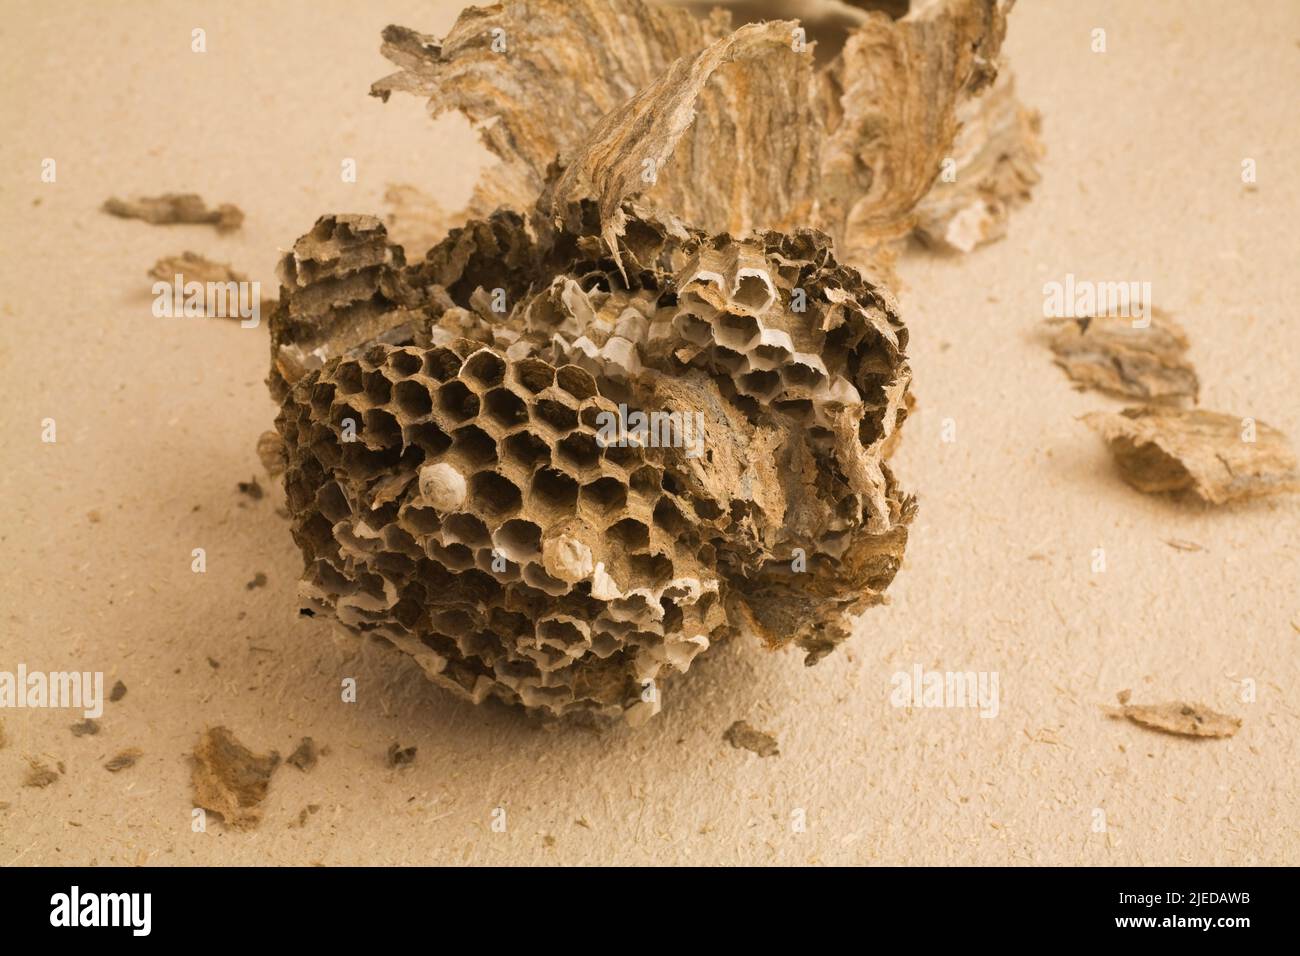 Close-up of abandoned and shattered Vespula vulgaris - Common Wasp nest on textured paper background. Stock Photo